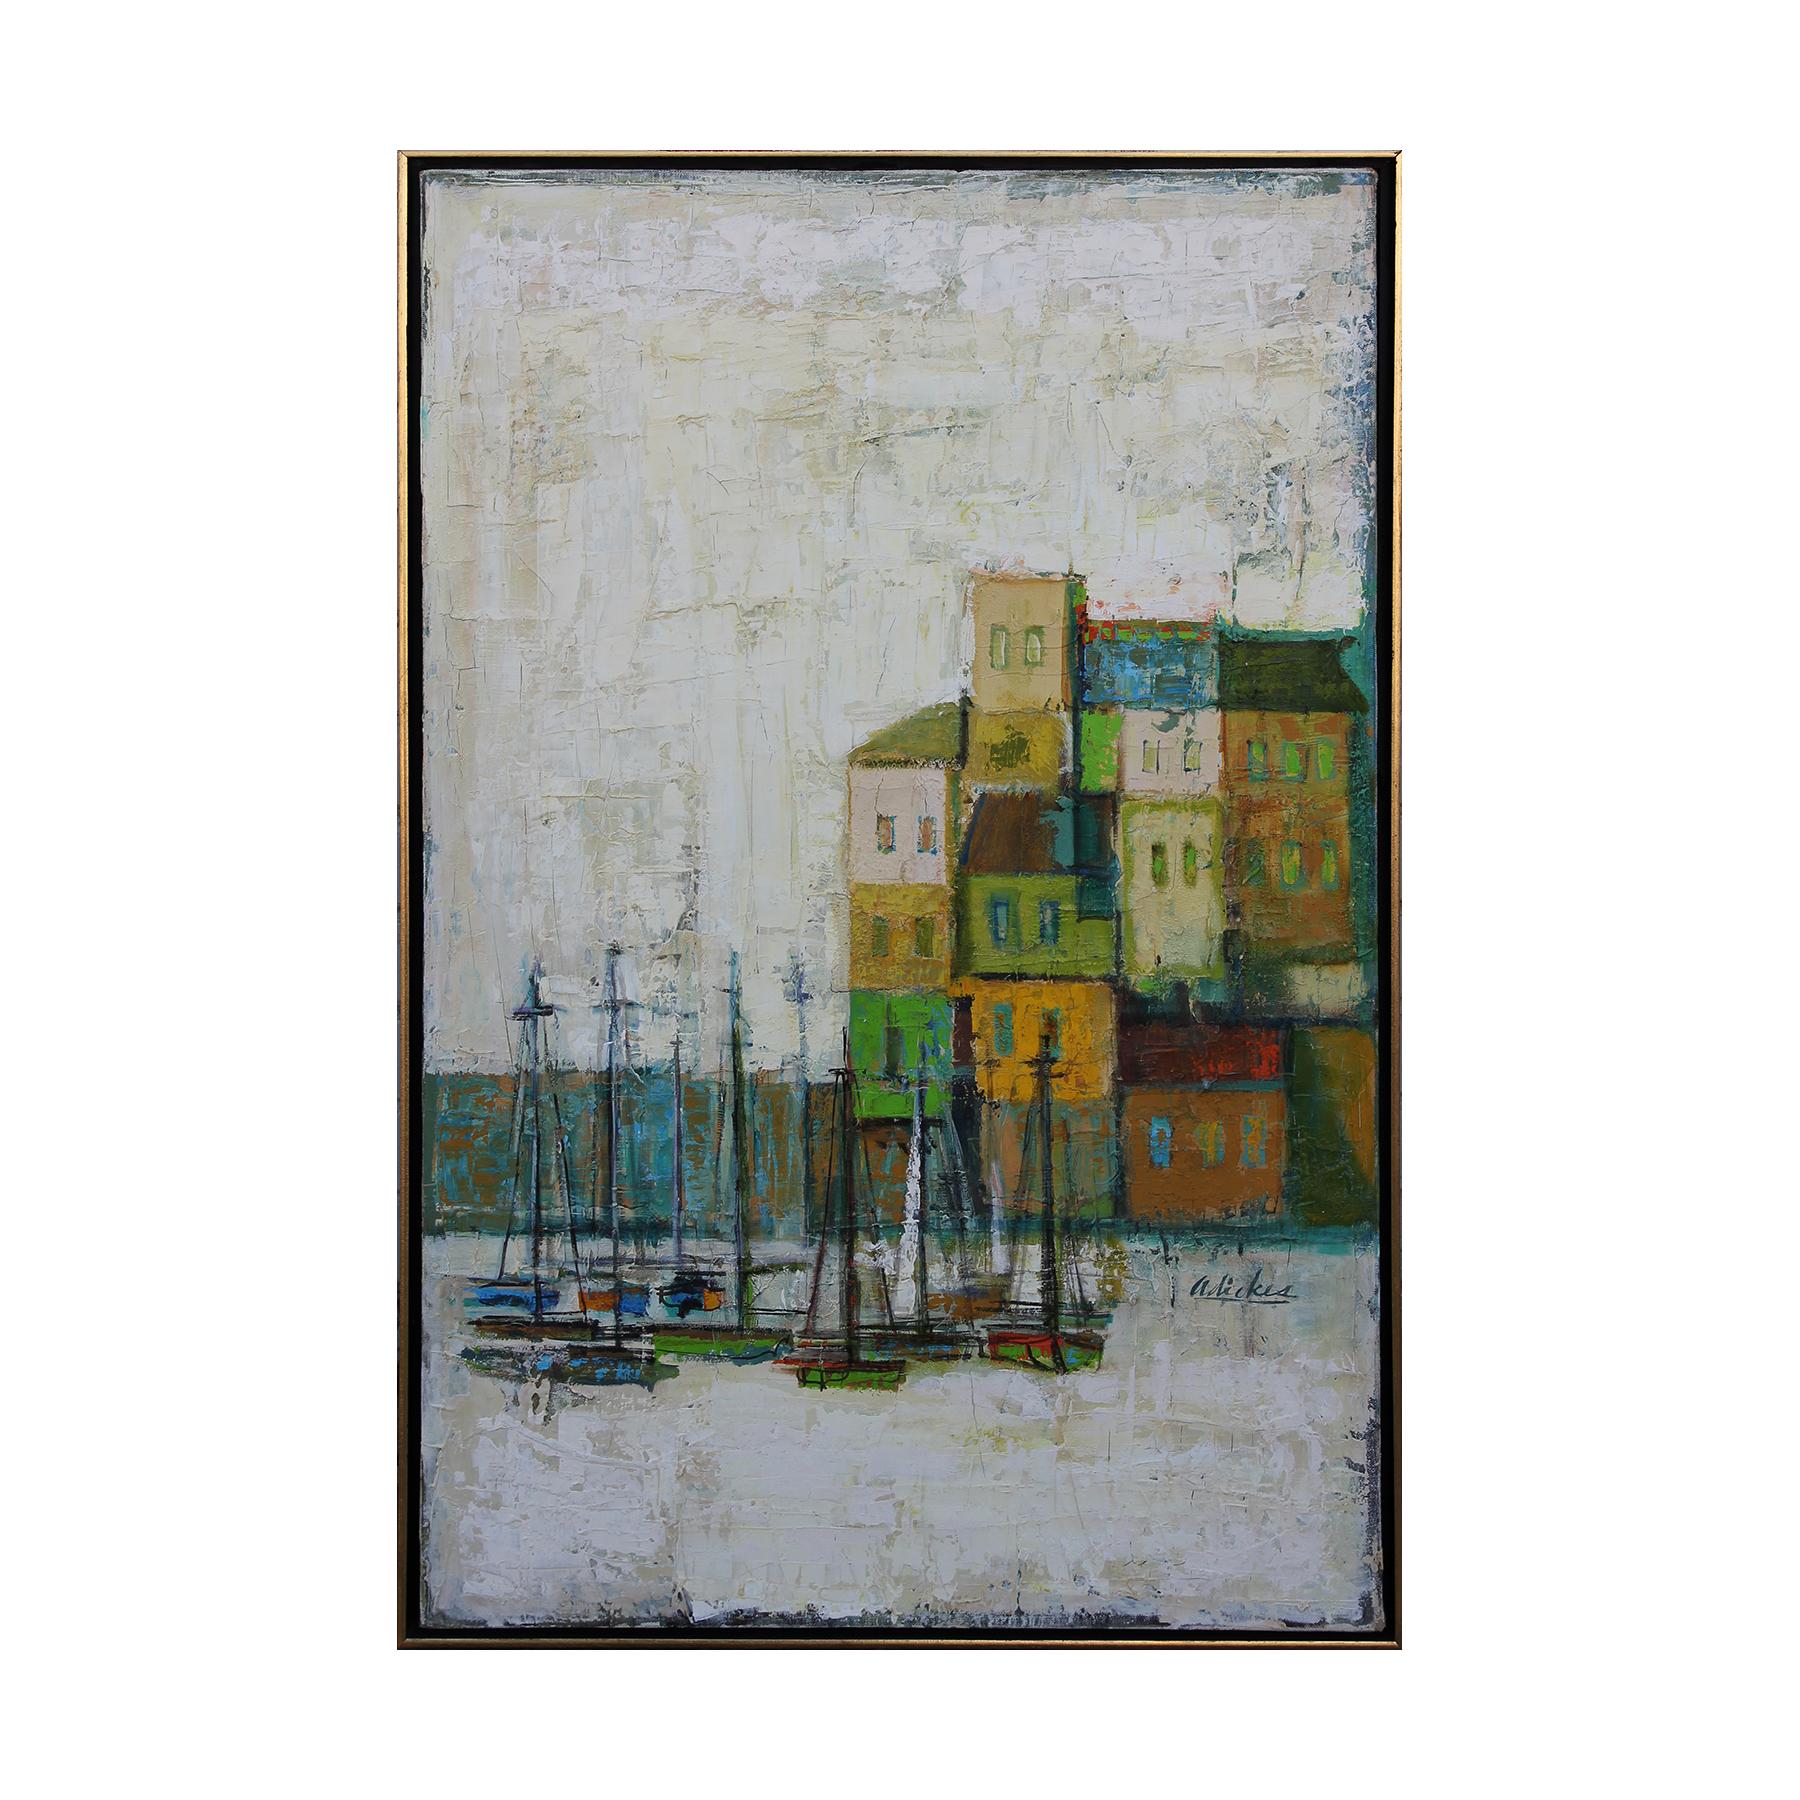 David Adickes Abstract Painting - Textured Abstract Impressionist Modern Vertical Green Cityscape with Boats